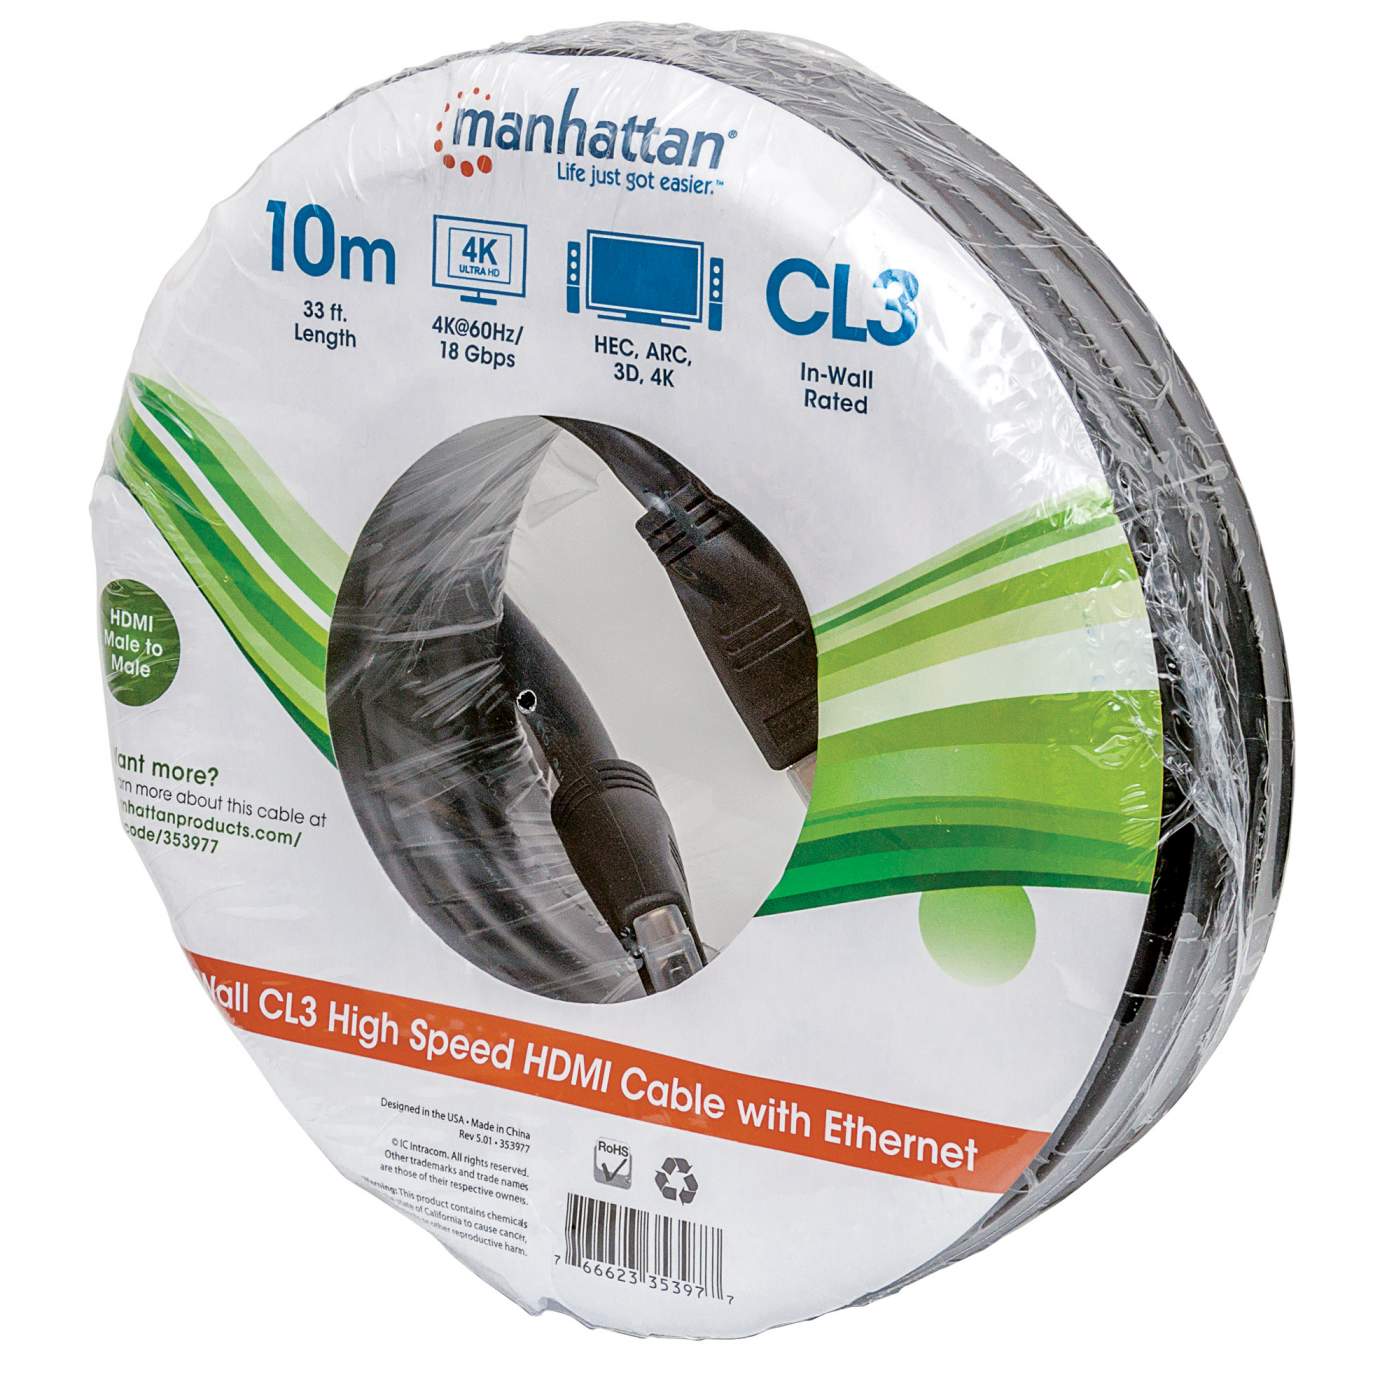 In-wall CL3 High Speed HDMI Cable w/ Ethernet (353977)